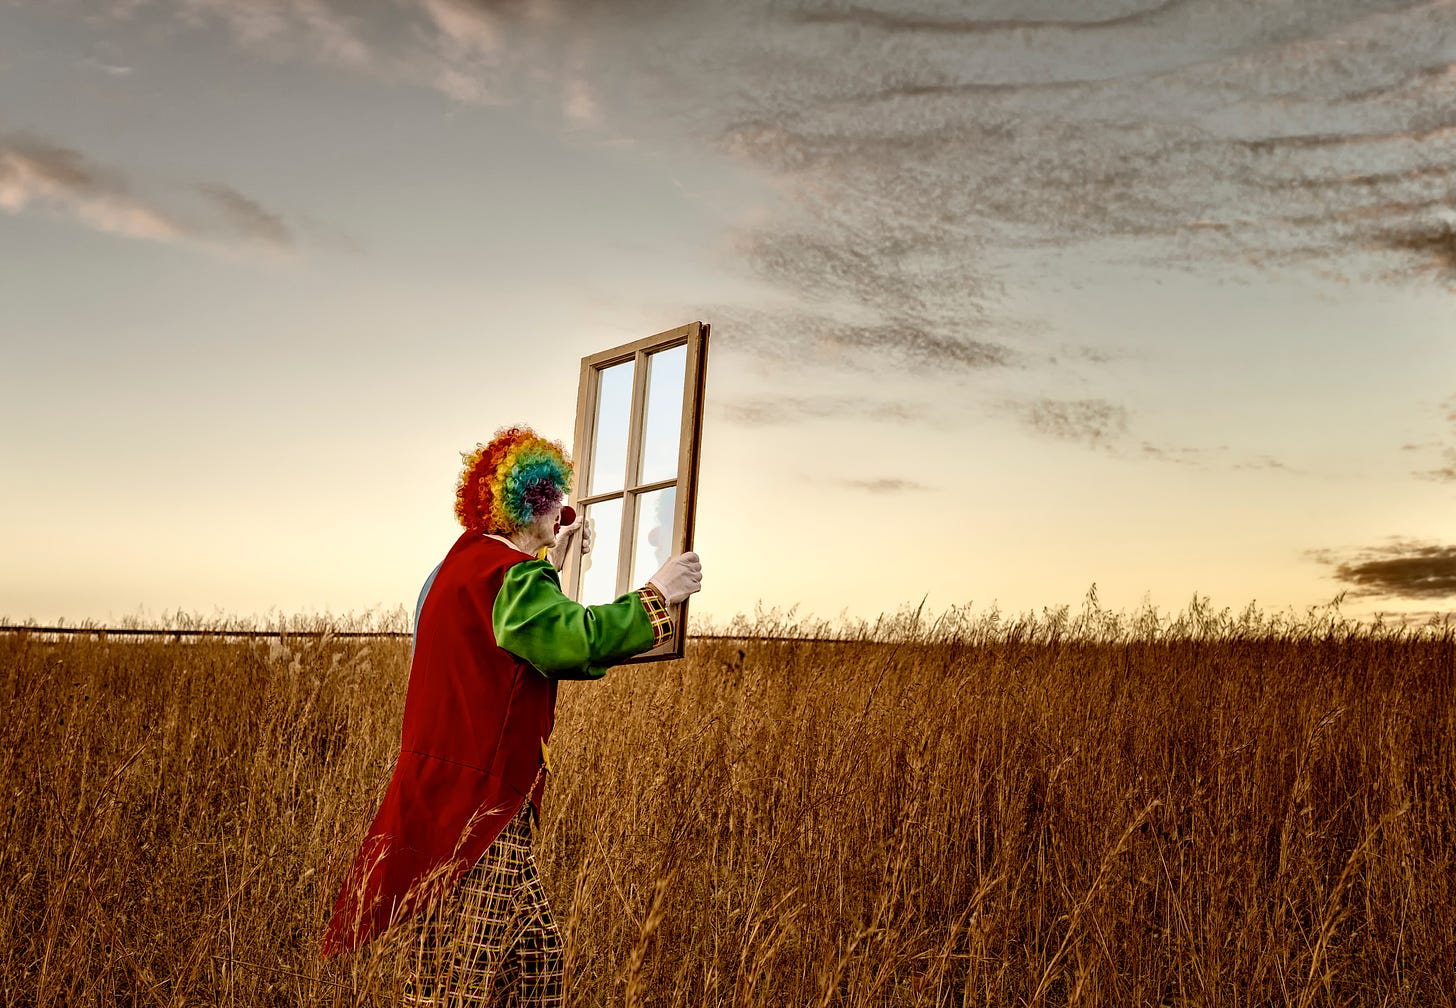 A rainbow wigged clown standing in a wheat field holding a four pane window and staring thoughit